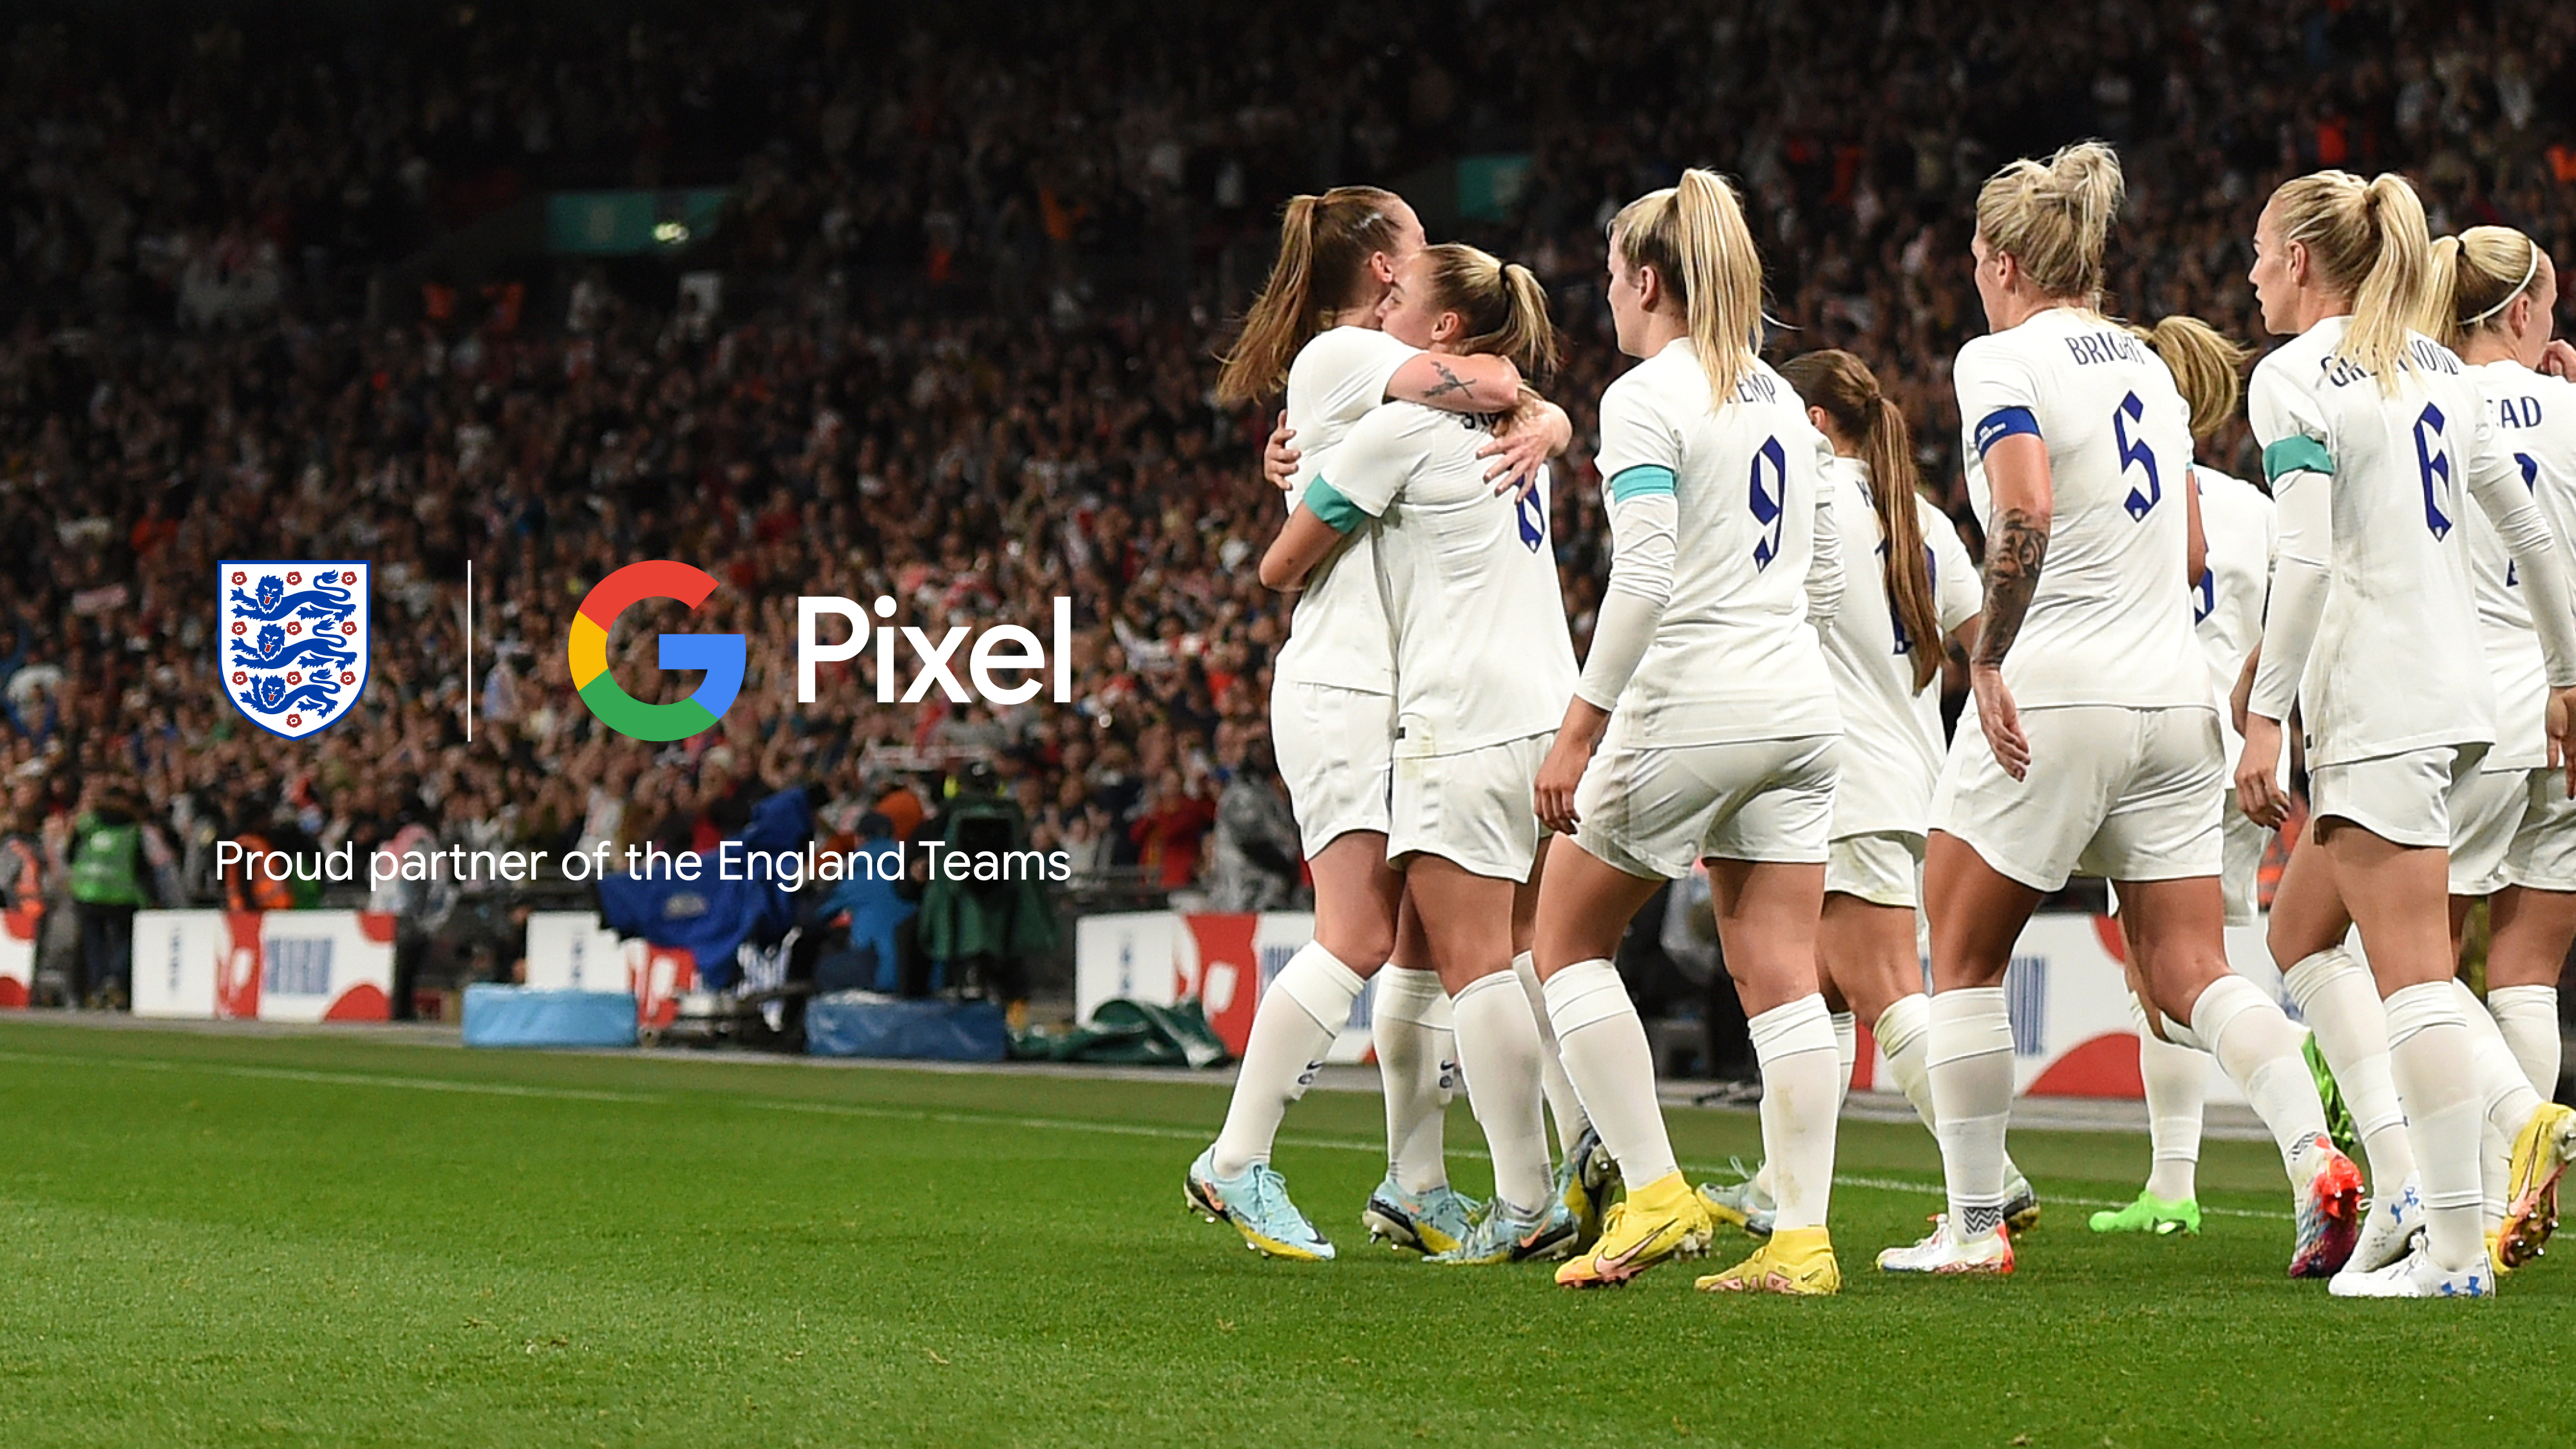 Bringing football fans closer to the game with Pixel and the FA